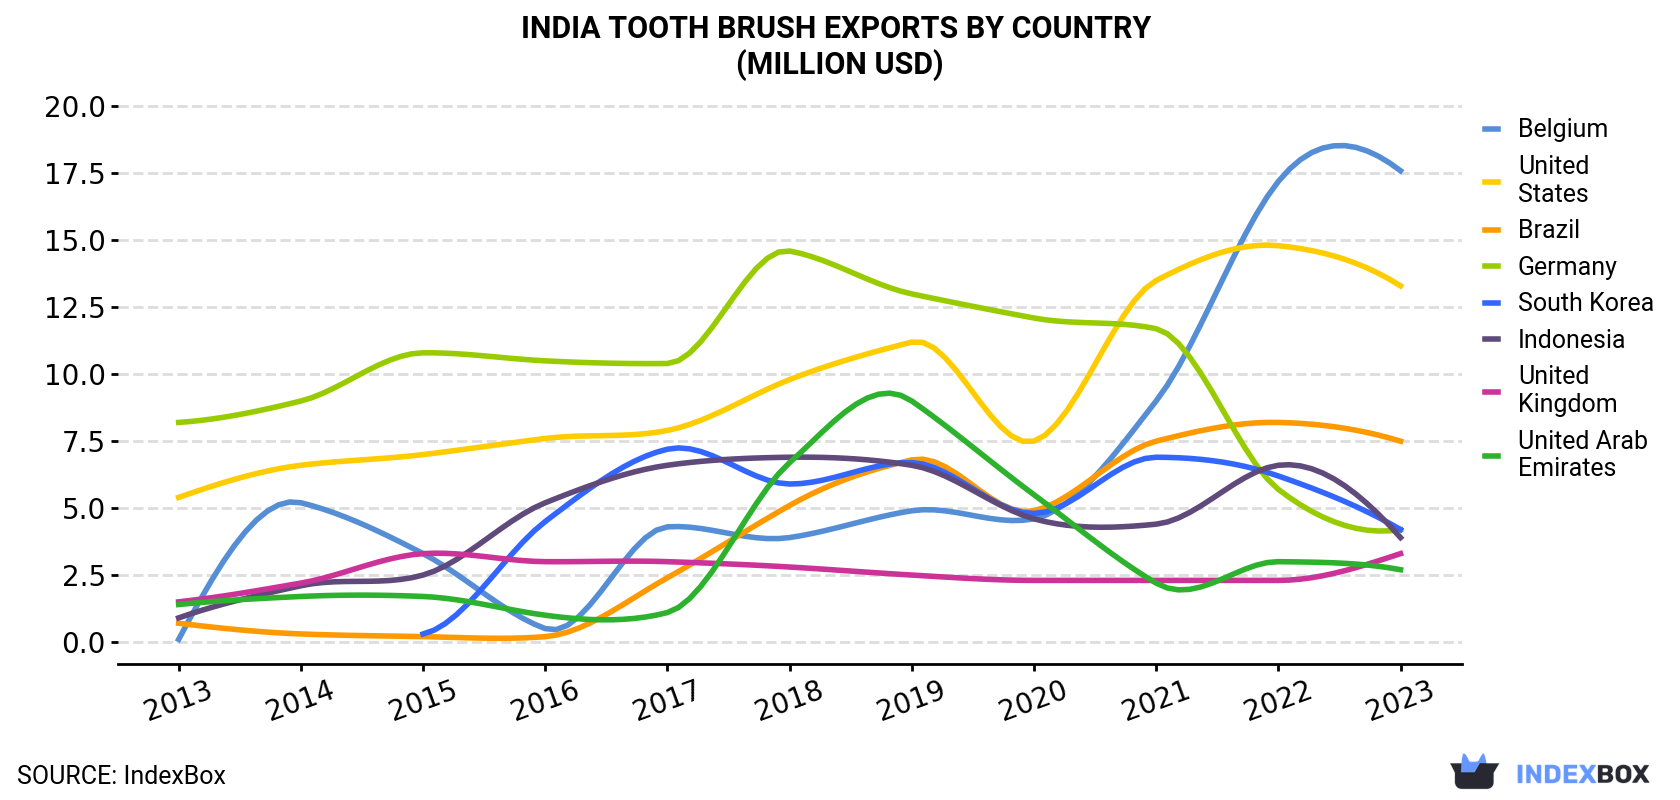 India Tooth Brush Exports By Country (Million USD)